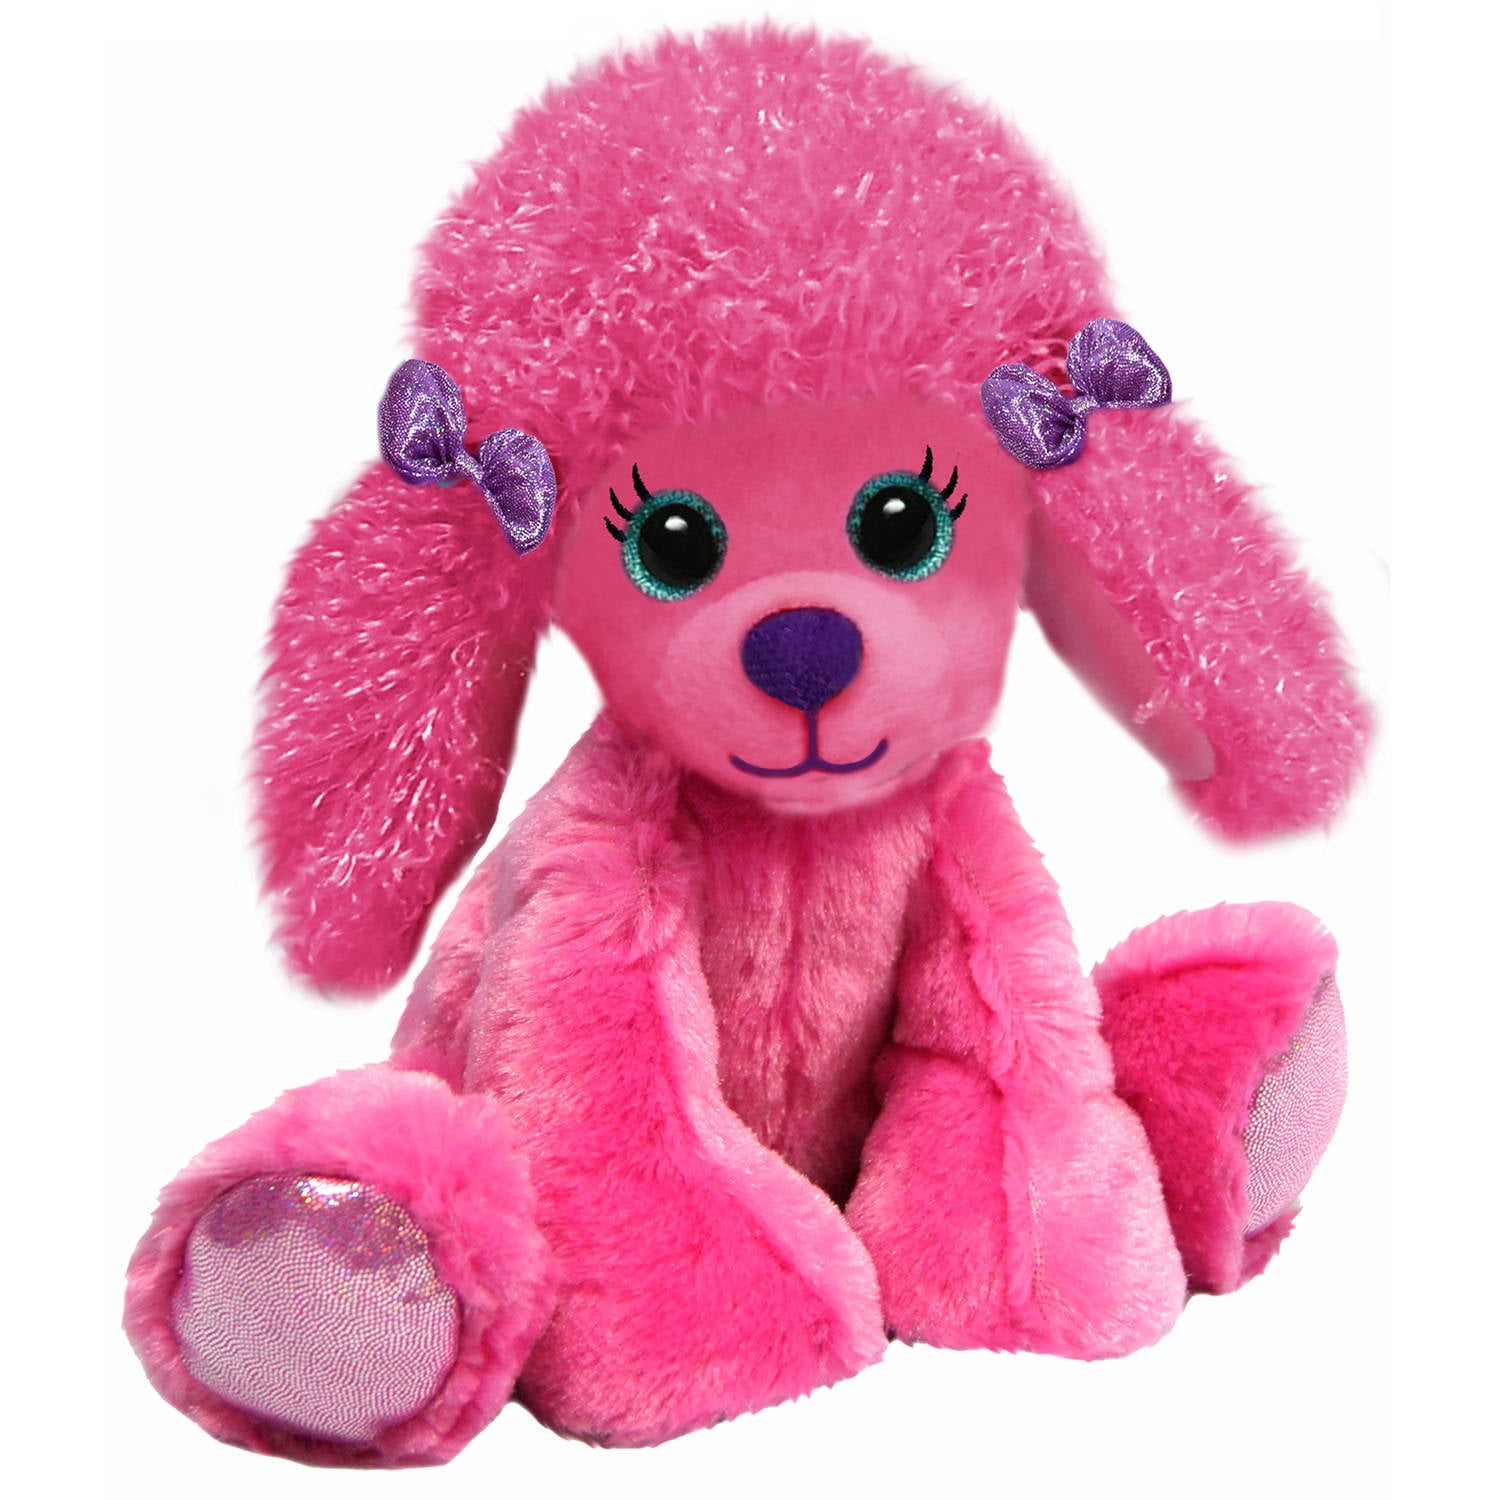 GANZ Webkinz Rockerz Poodle Plush Dog With Code Ages 5 Groovy Brown Hm5108 for sale online 